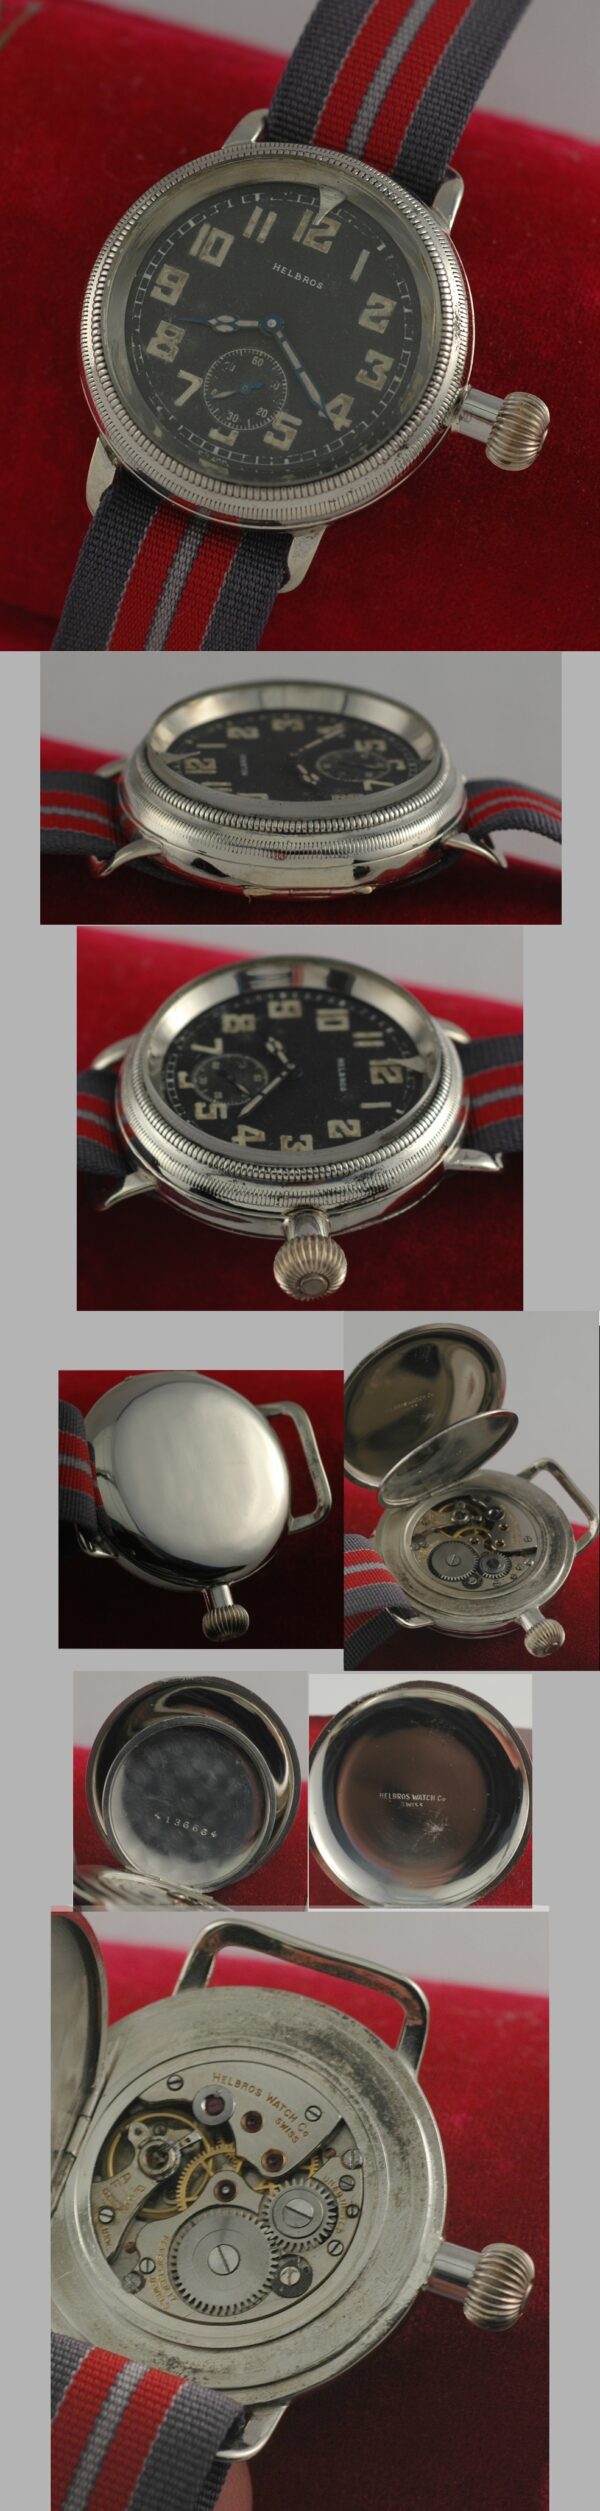 1939 Helbros chrome-plated WW2-era aviator's watch with original onion winding crown, radium dial, hands, and clean manual winding movement.